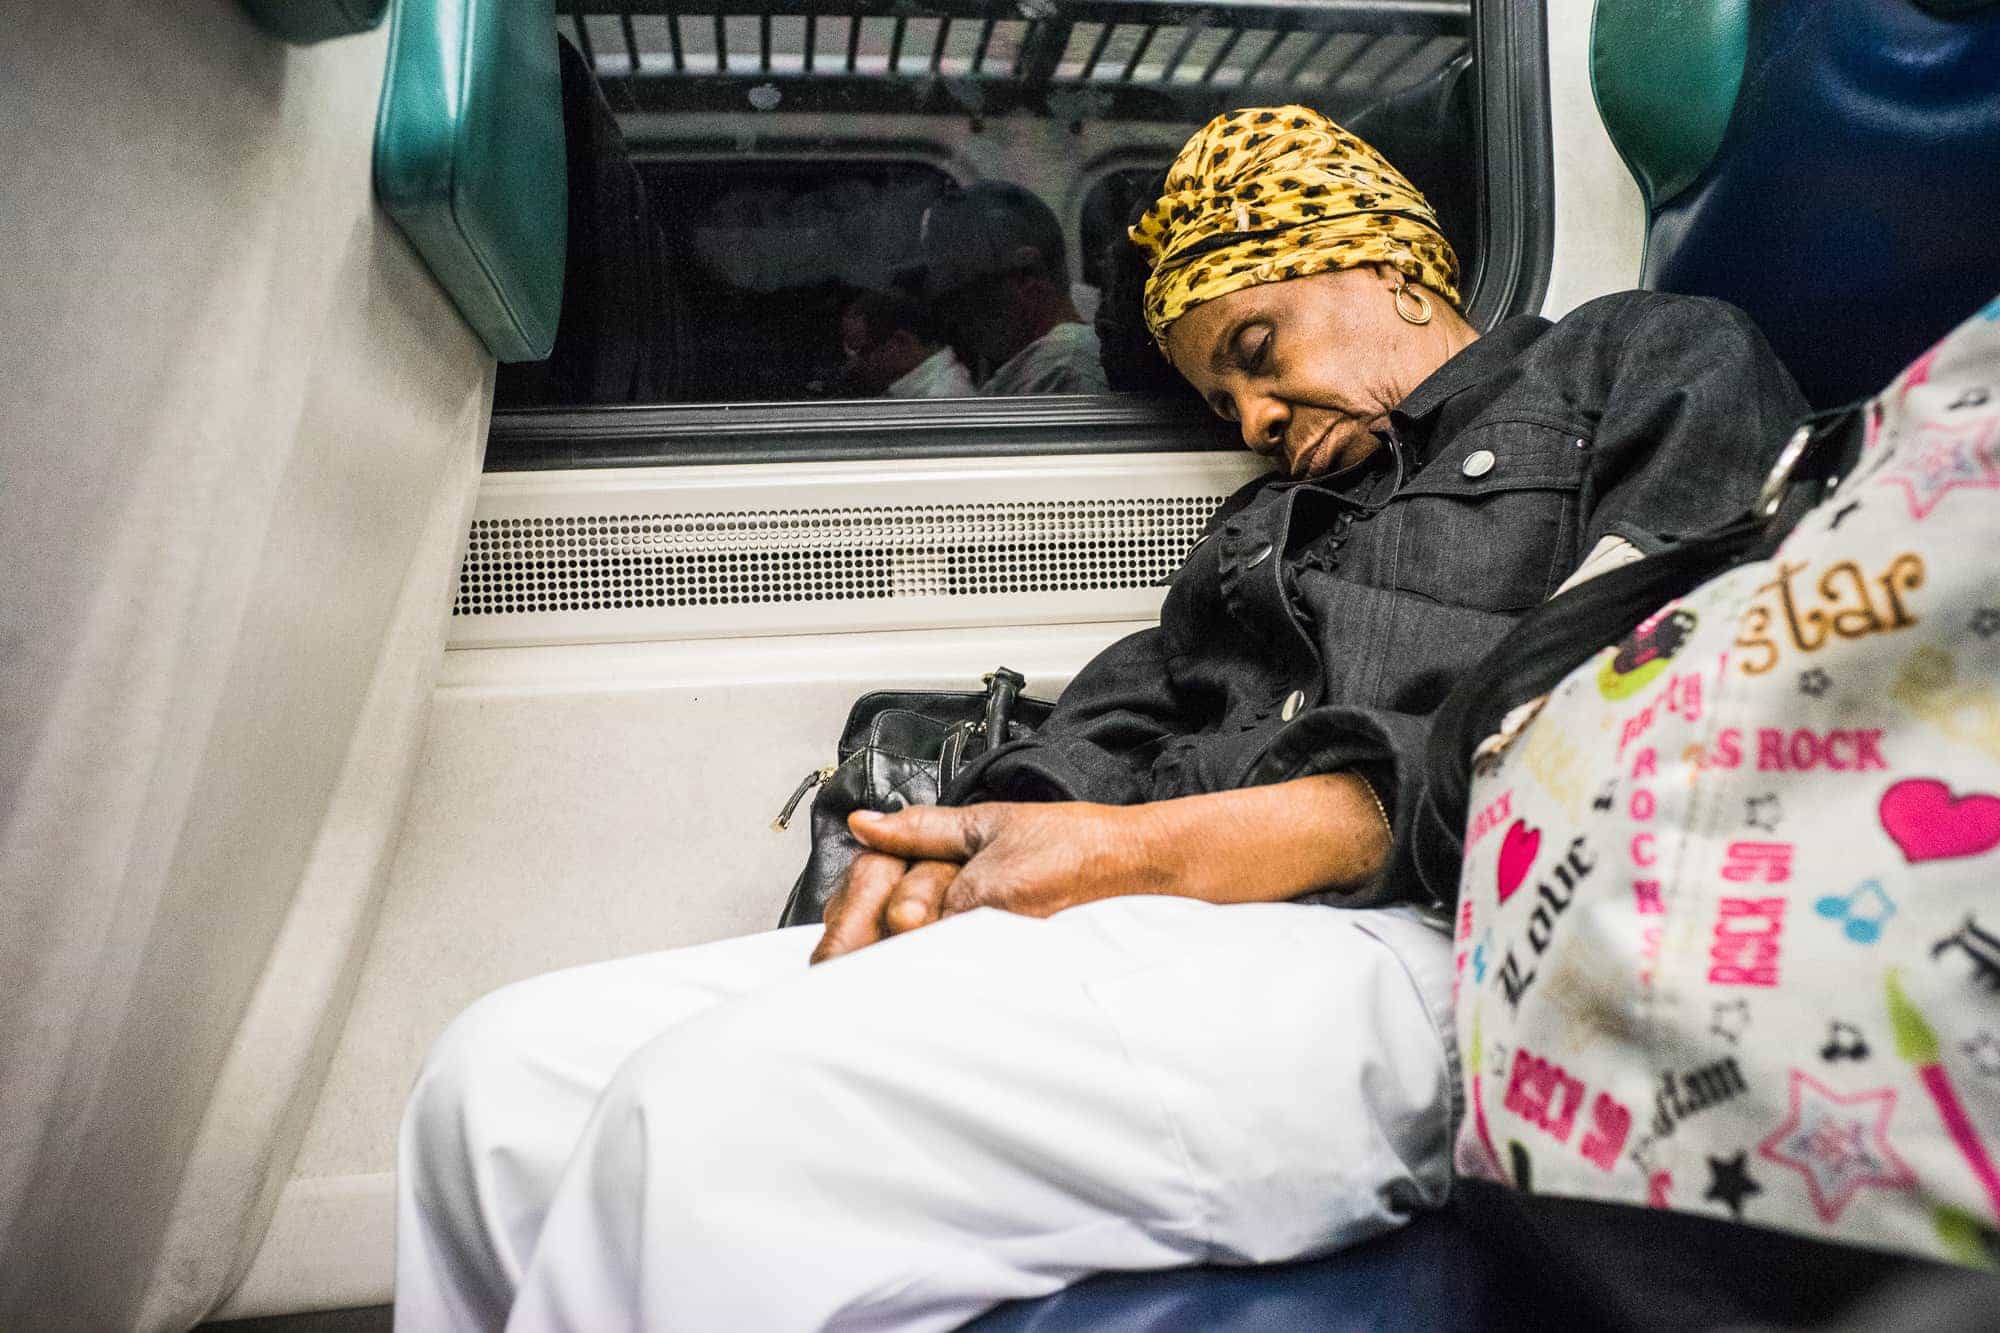 New York City, N.Y. - A woman naps on a Metro North train on it's way into Manhattan.